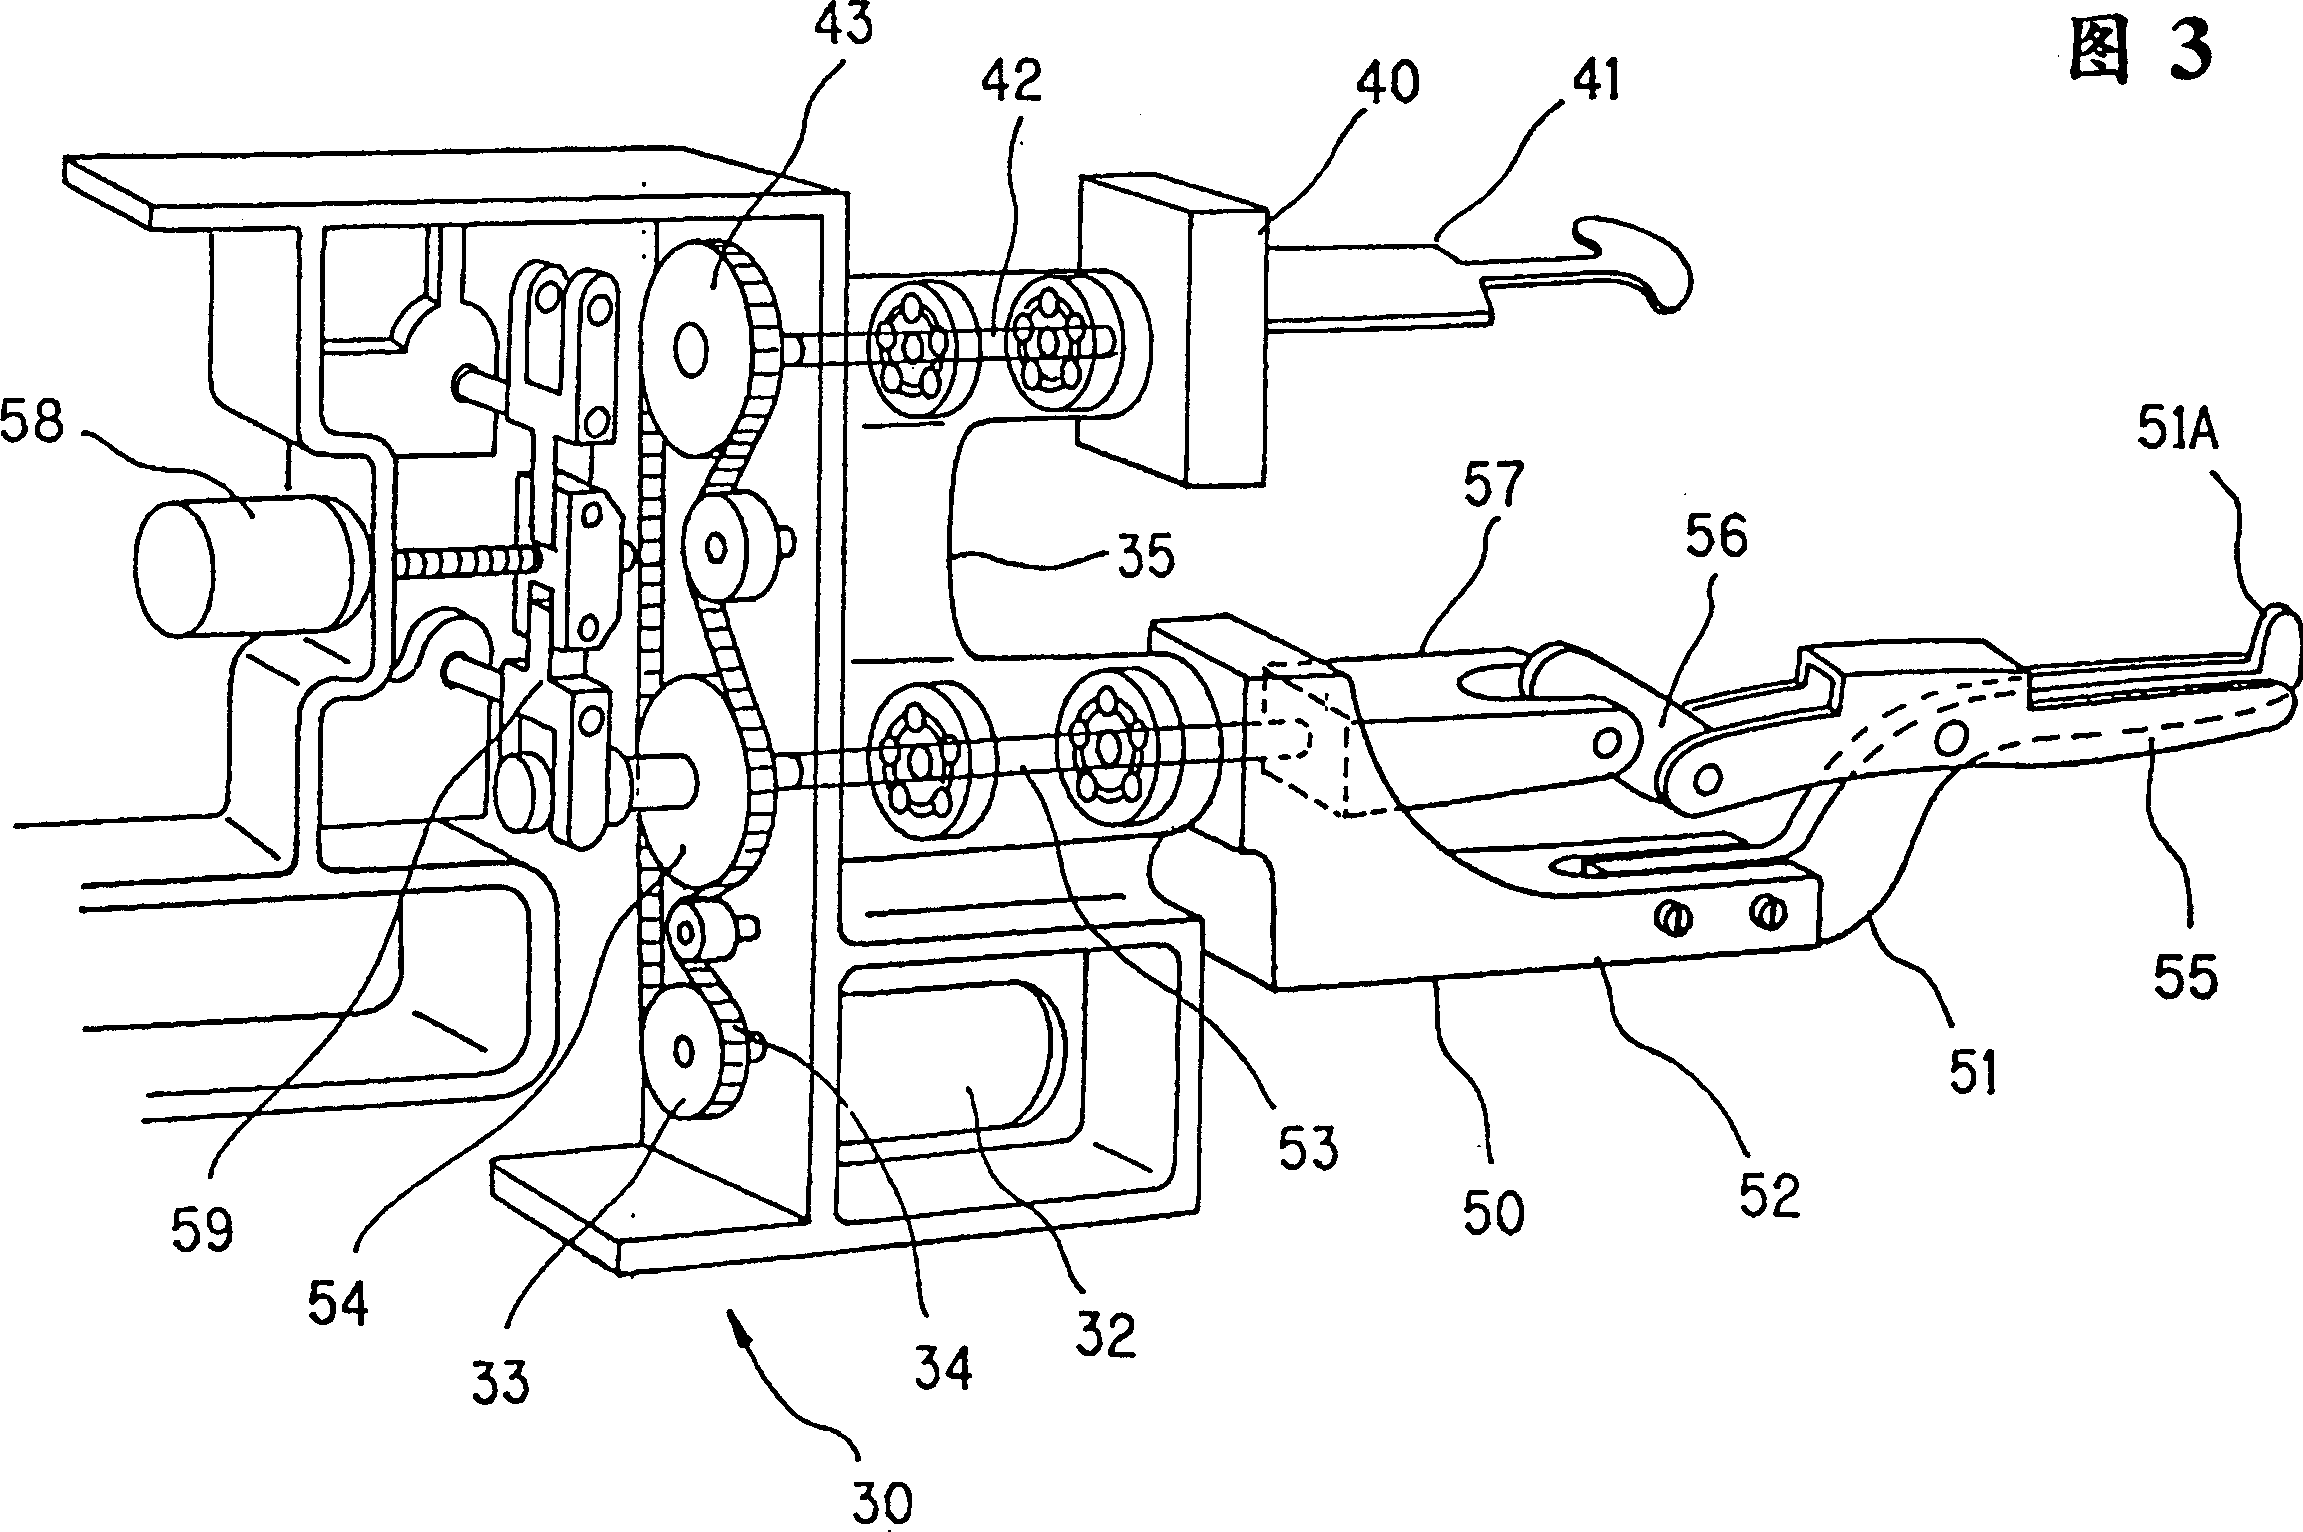 Coil winding device